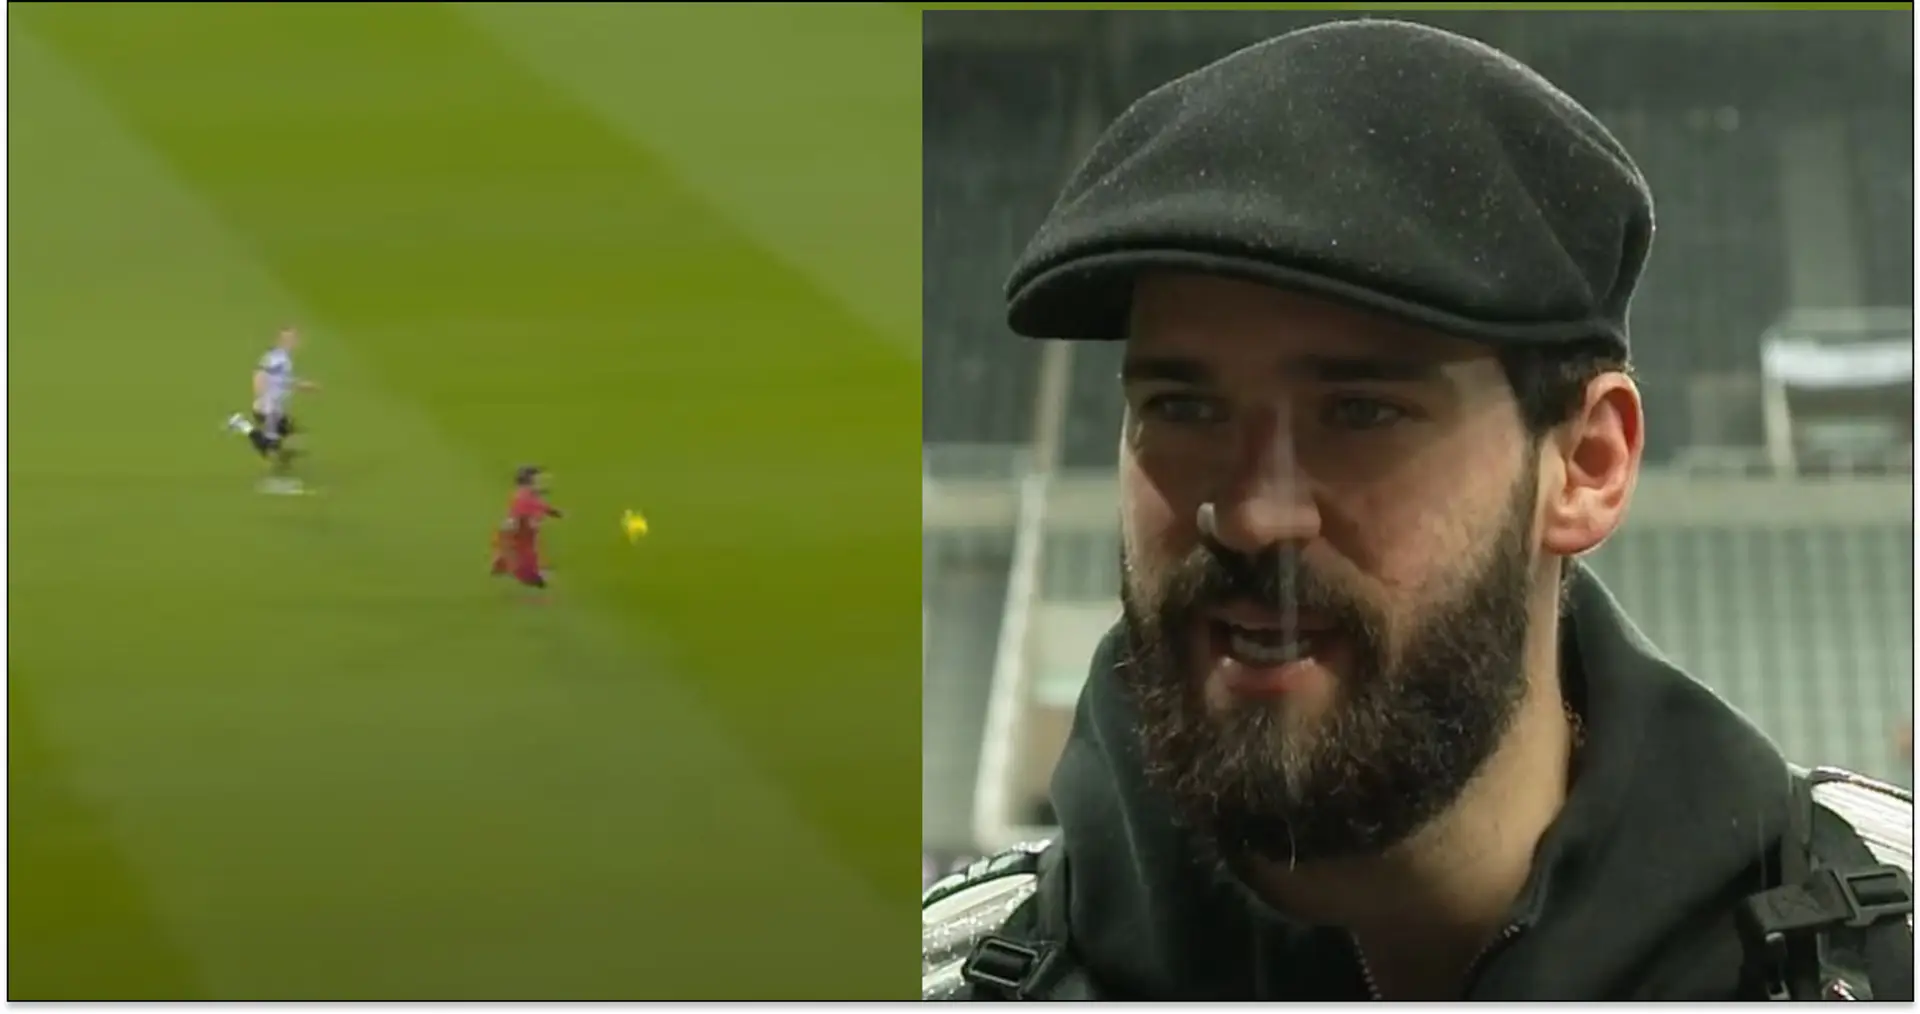 'When I catch the ball, Mo is going to run like crazy': Alisson explains his pass to Salah